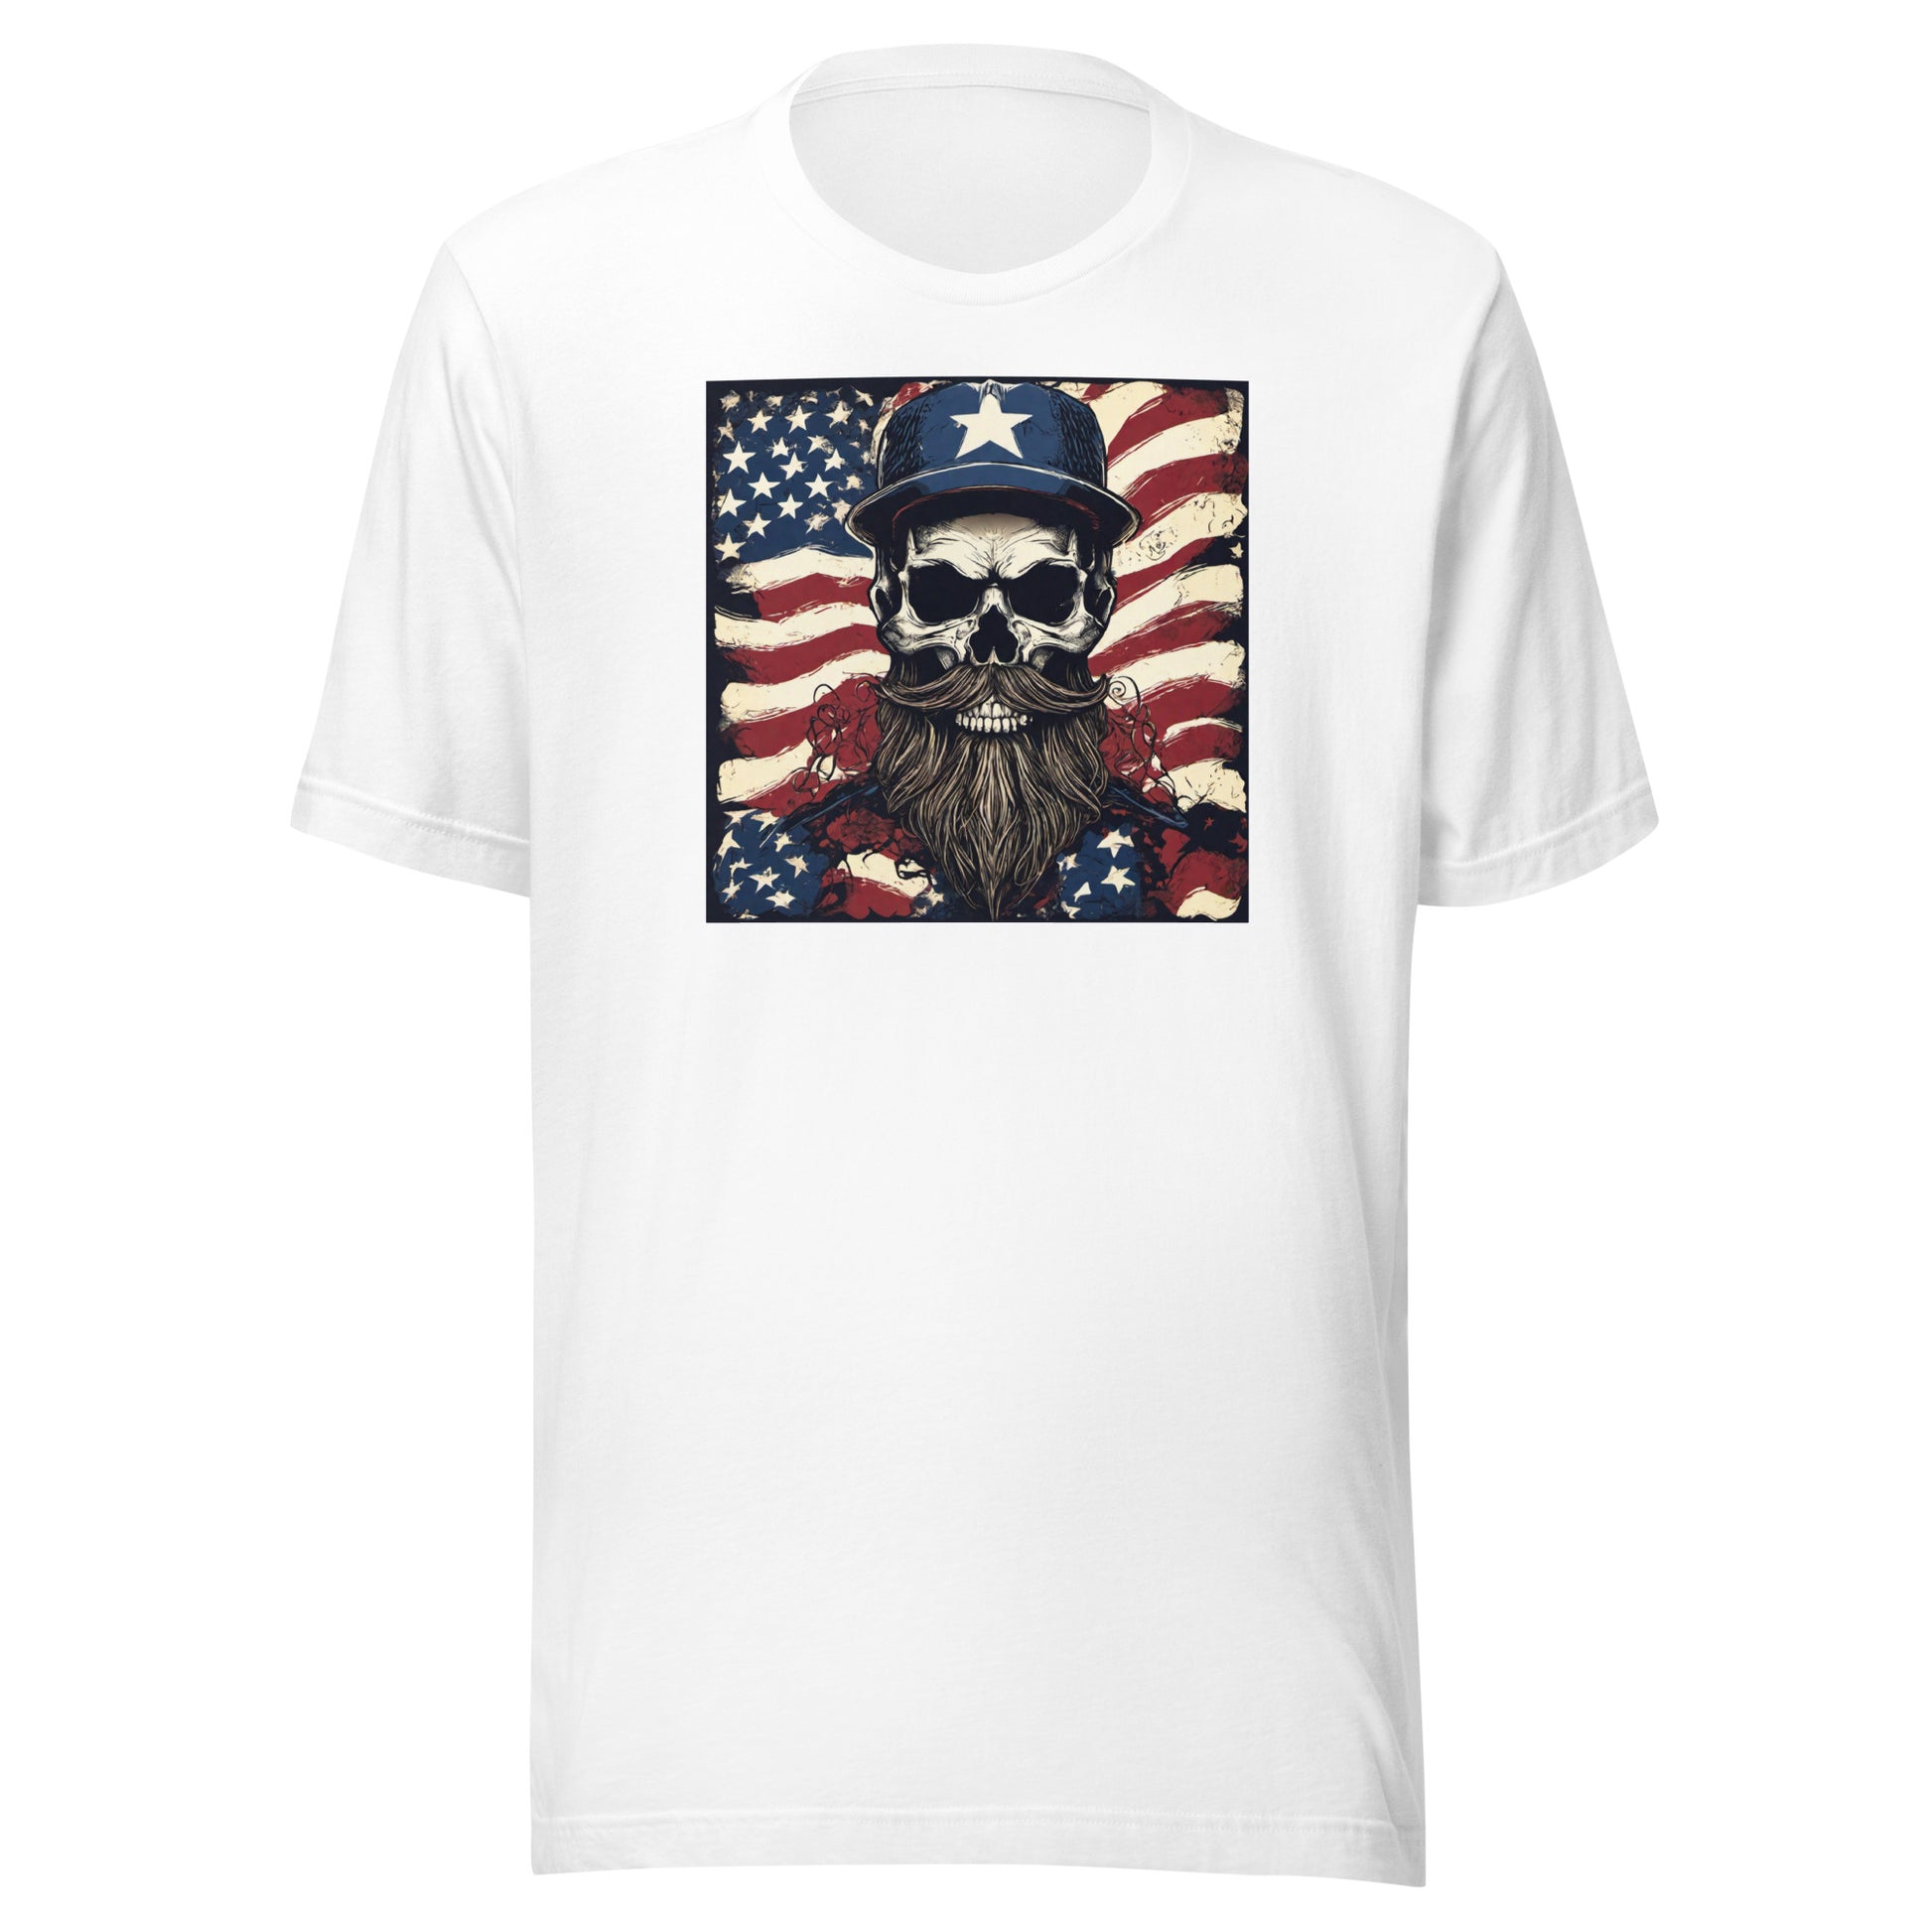 Handsome American Reaper Graphic T-Shirt White